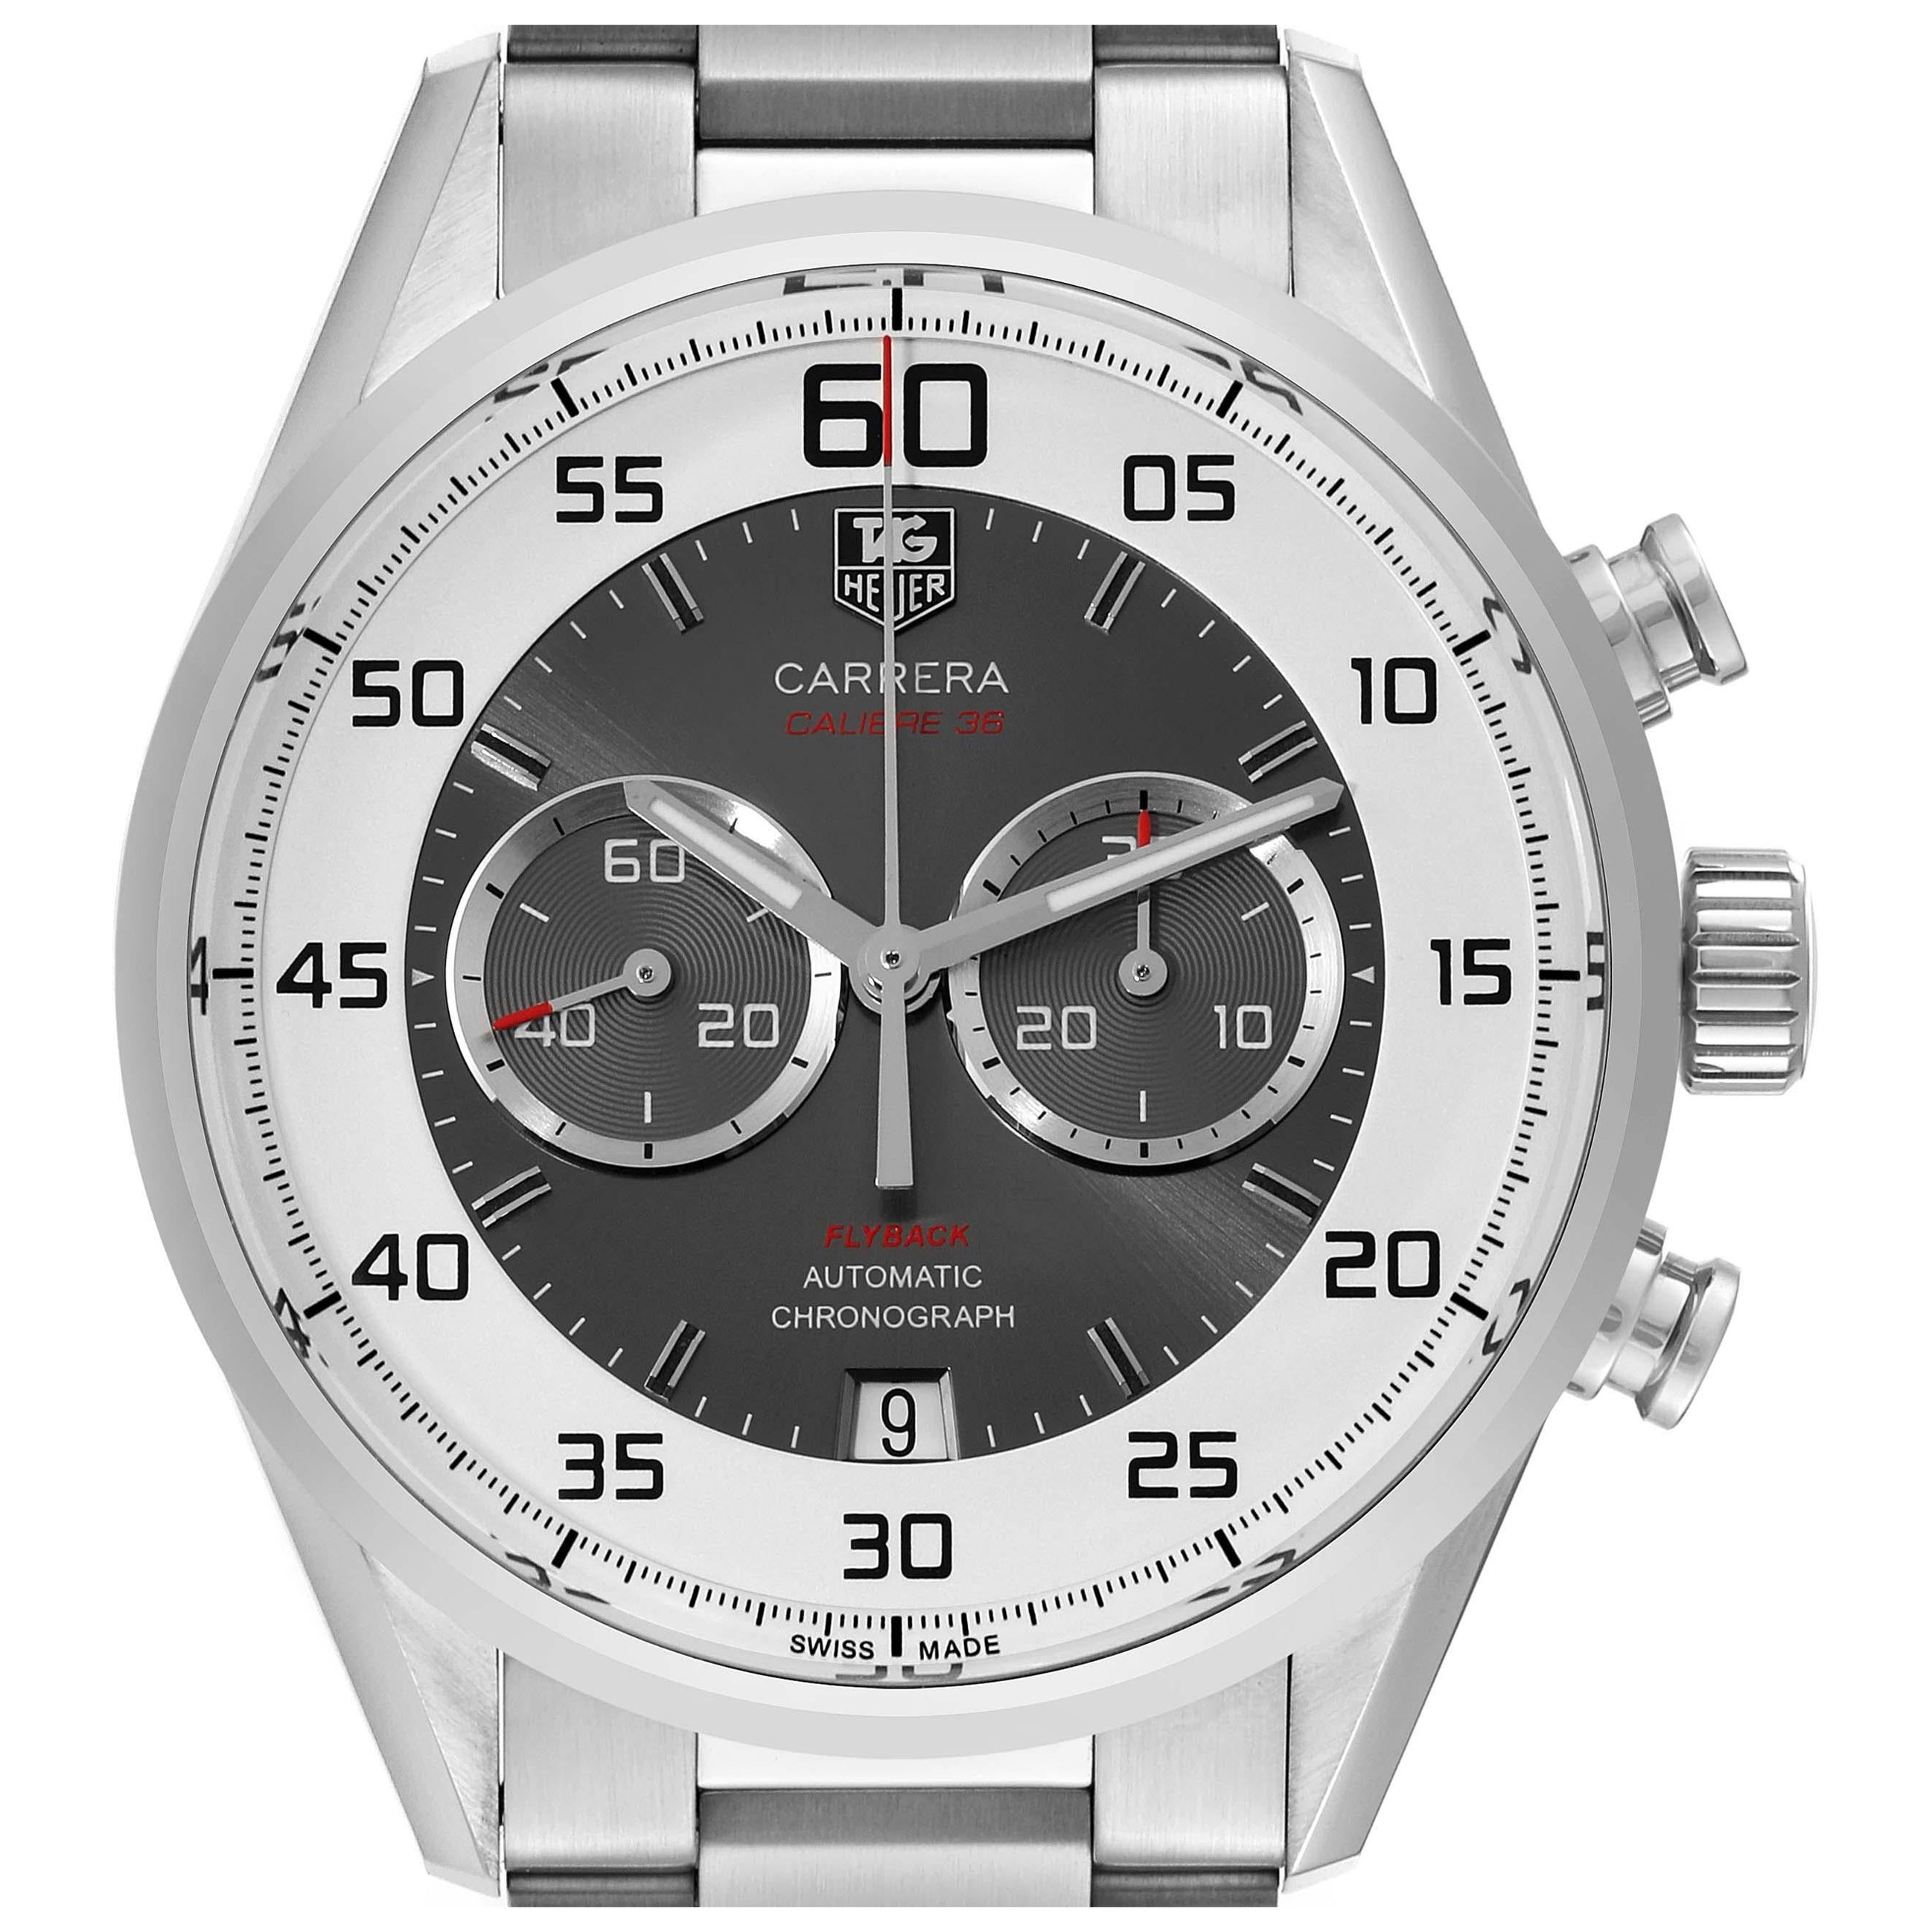 Tag Heuer Carrera Calibre 36 Flyback Steel Montre pour hommes CAR2B11 Boîte Card